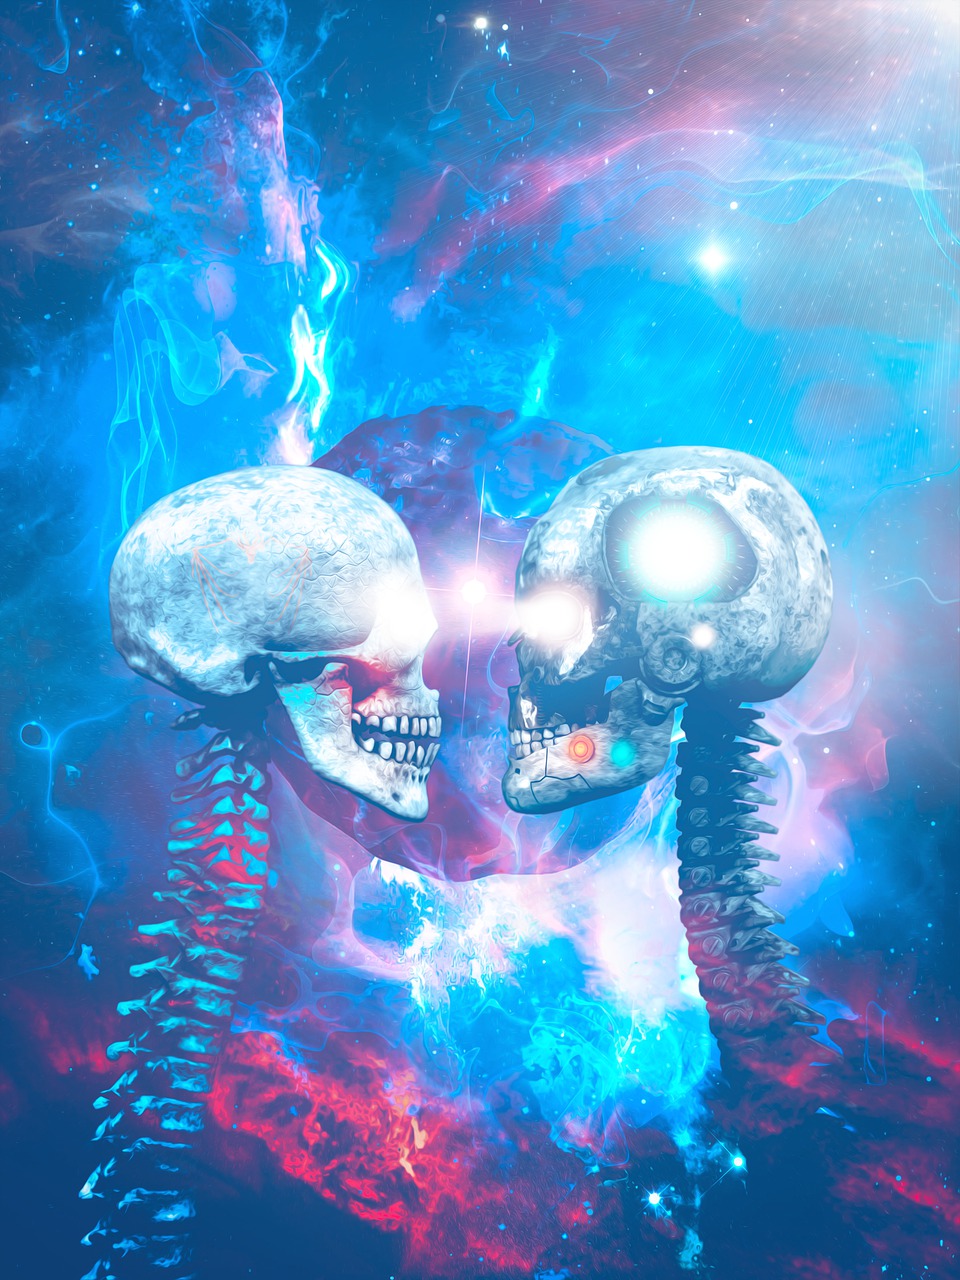 a couple of skulls standing next to each other, digital art, psychedelic art, strange portrait with galaxy, high quality fantasy stock photo, blurred and dreamy illustration, they are in love